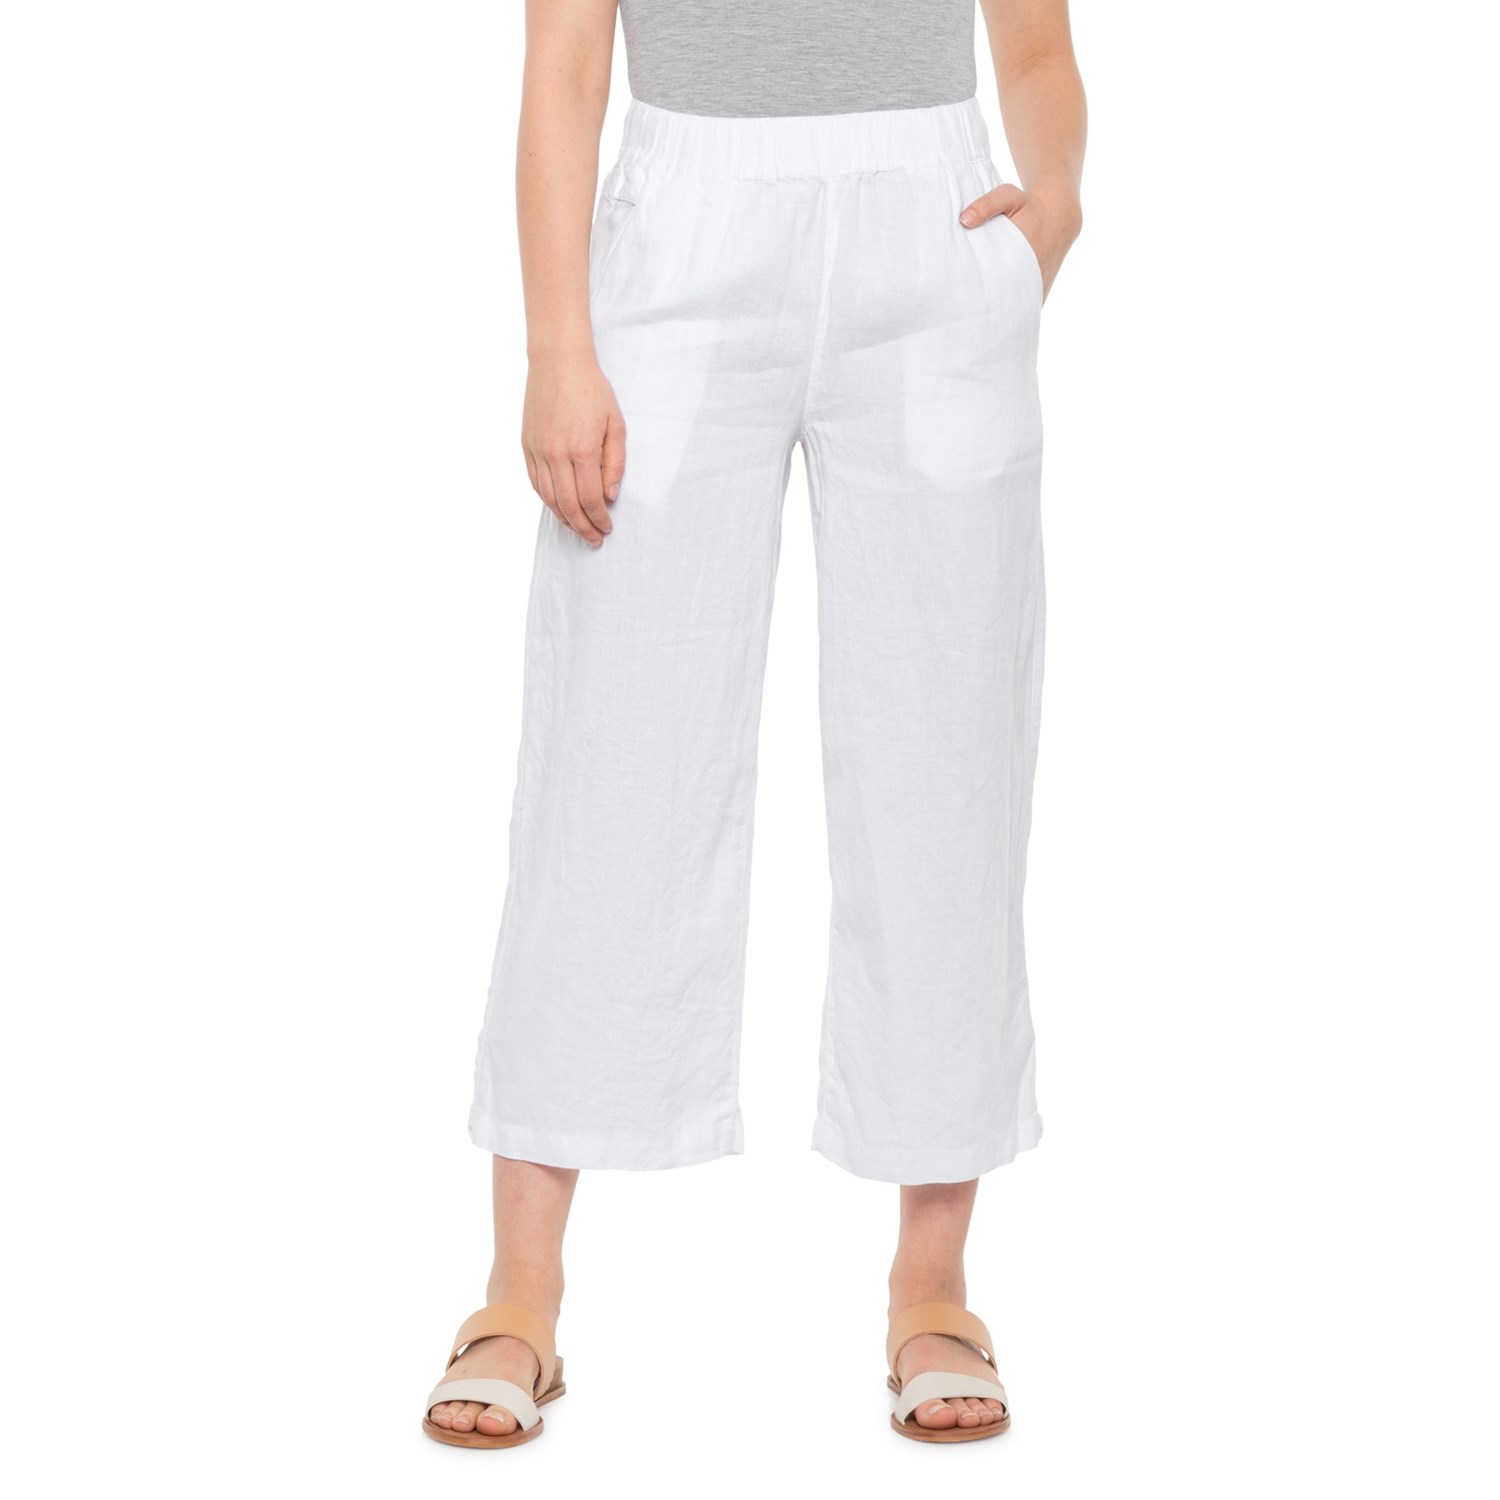 Cynthia Rowley Cross-Dyed Pull-On Crop Pants (For Women) - Save 23%